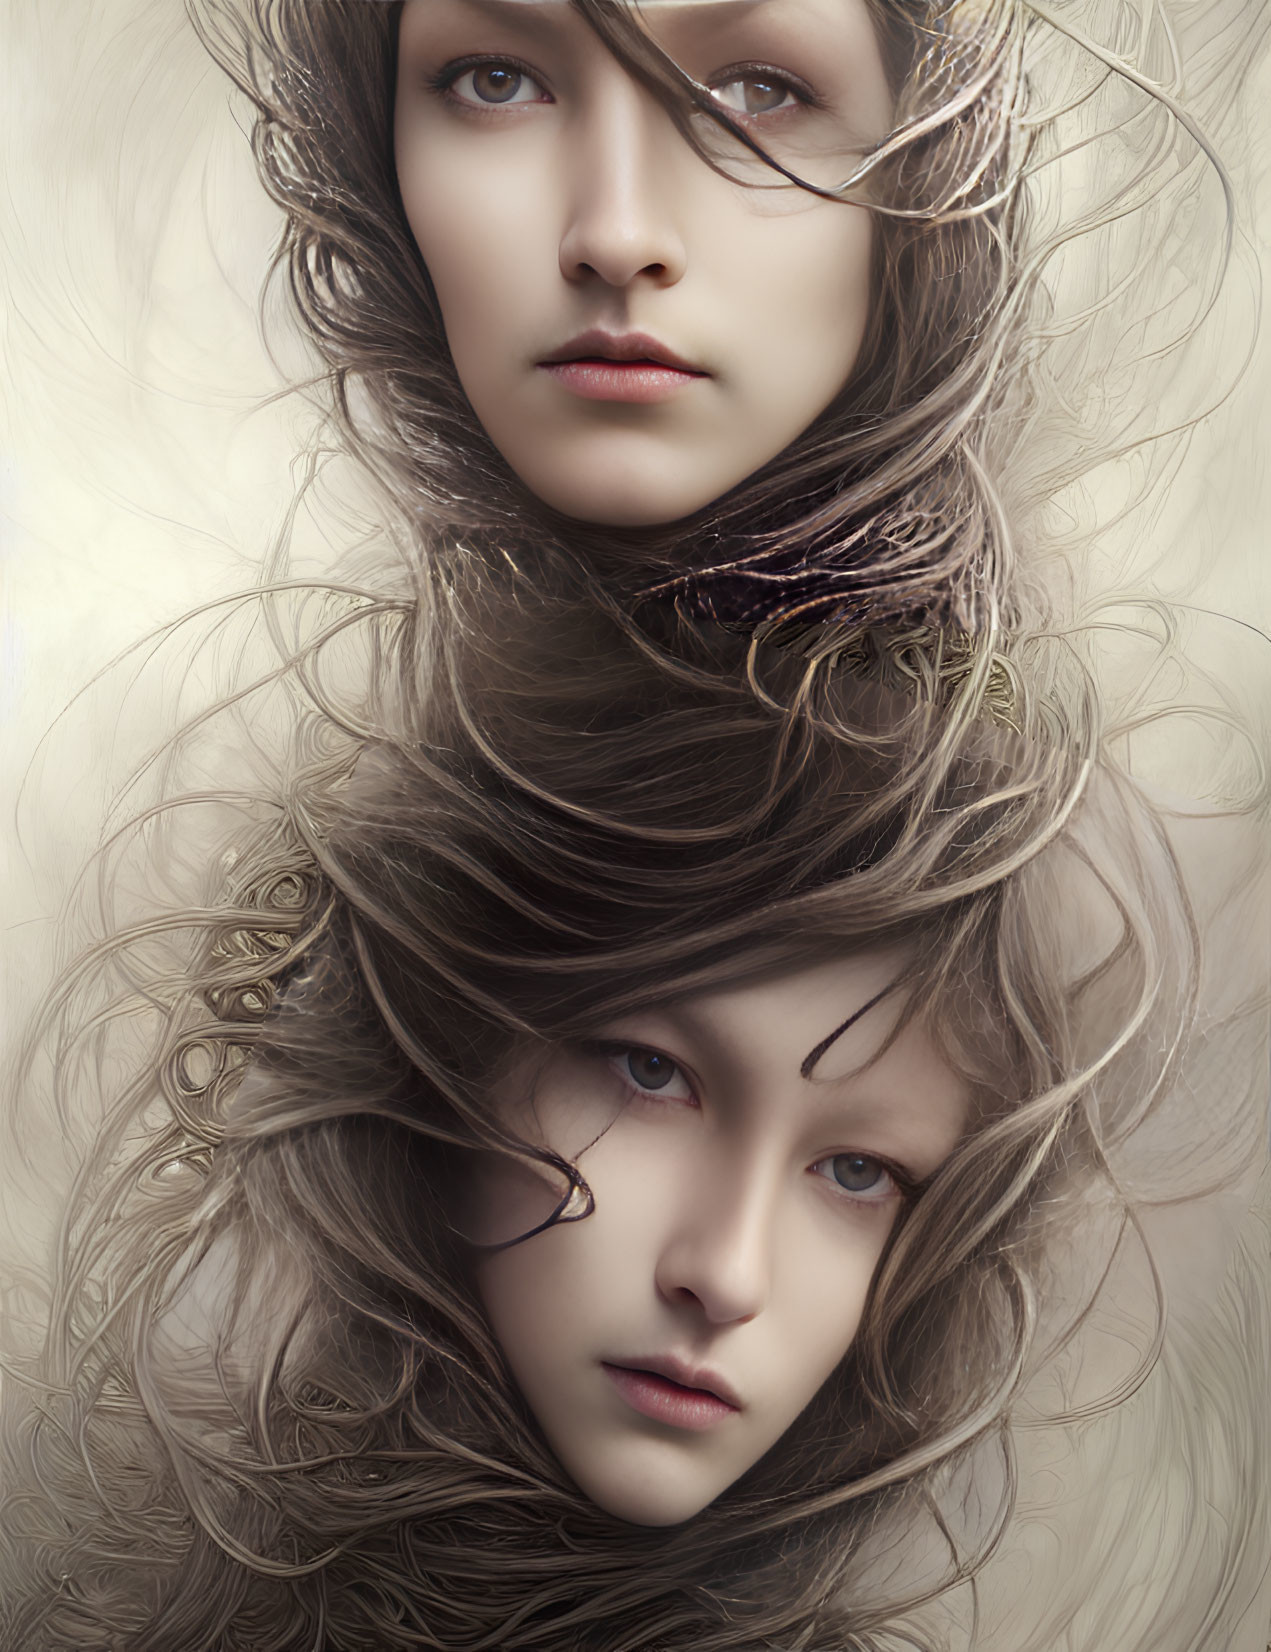 Interwoven female faces with flowing hair in surreal art